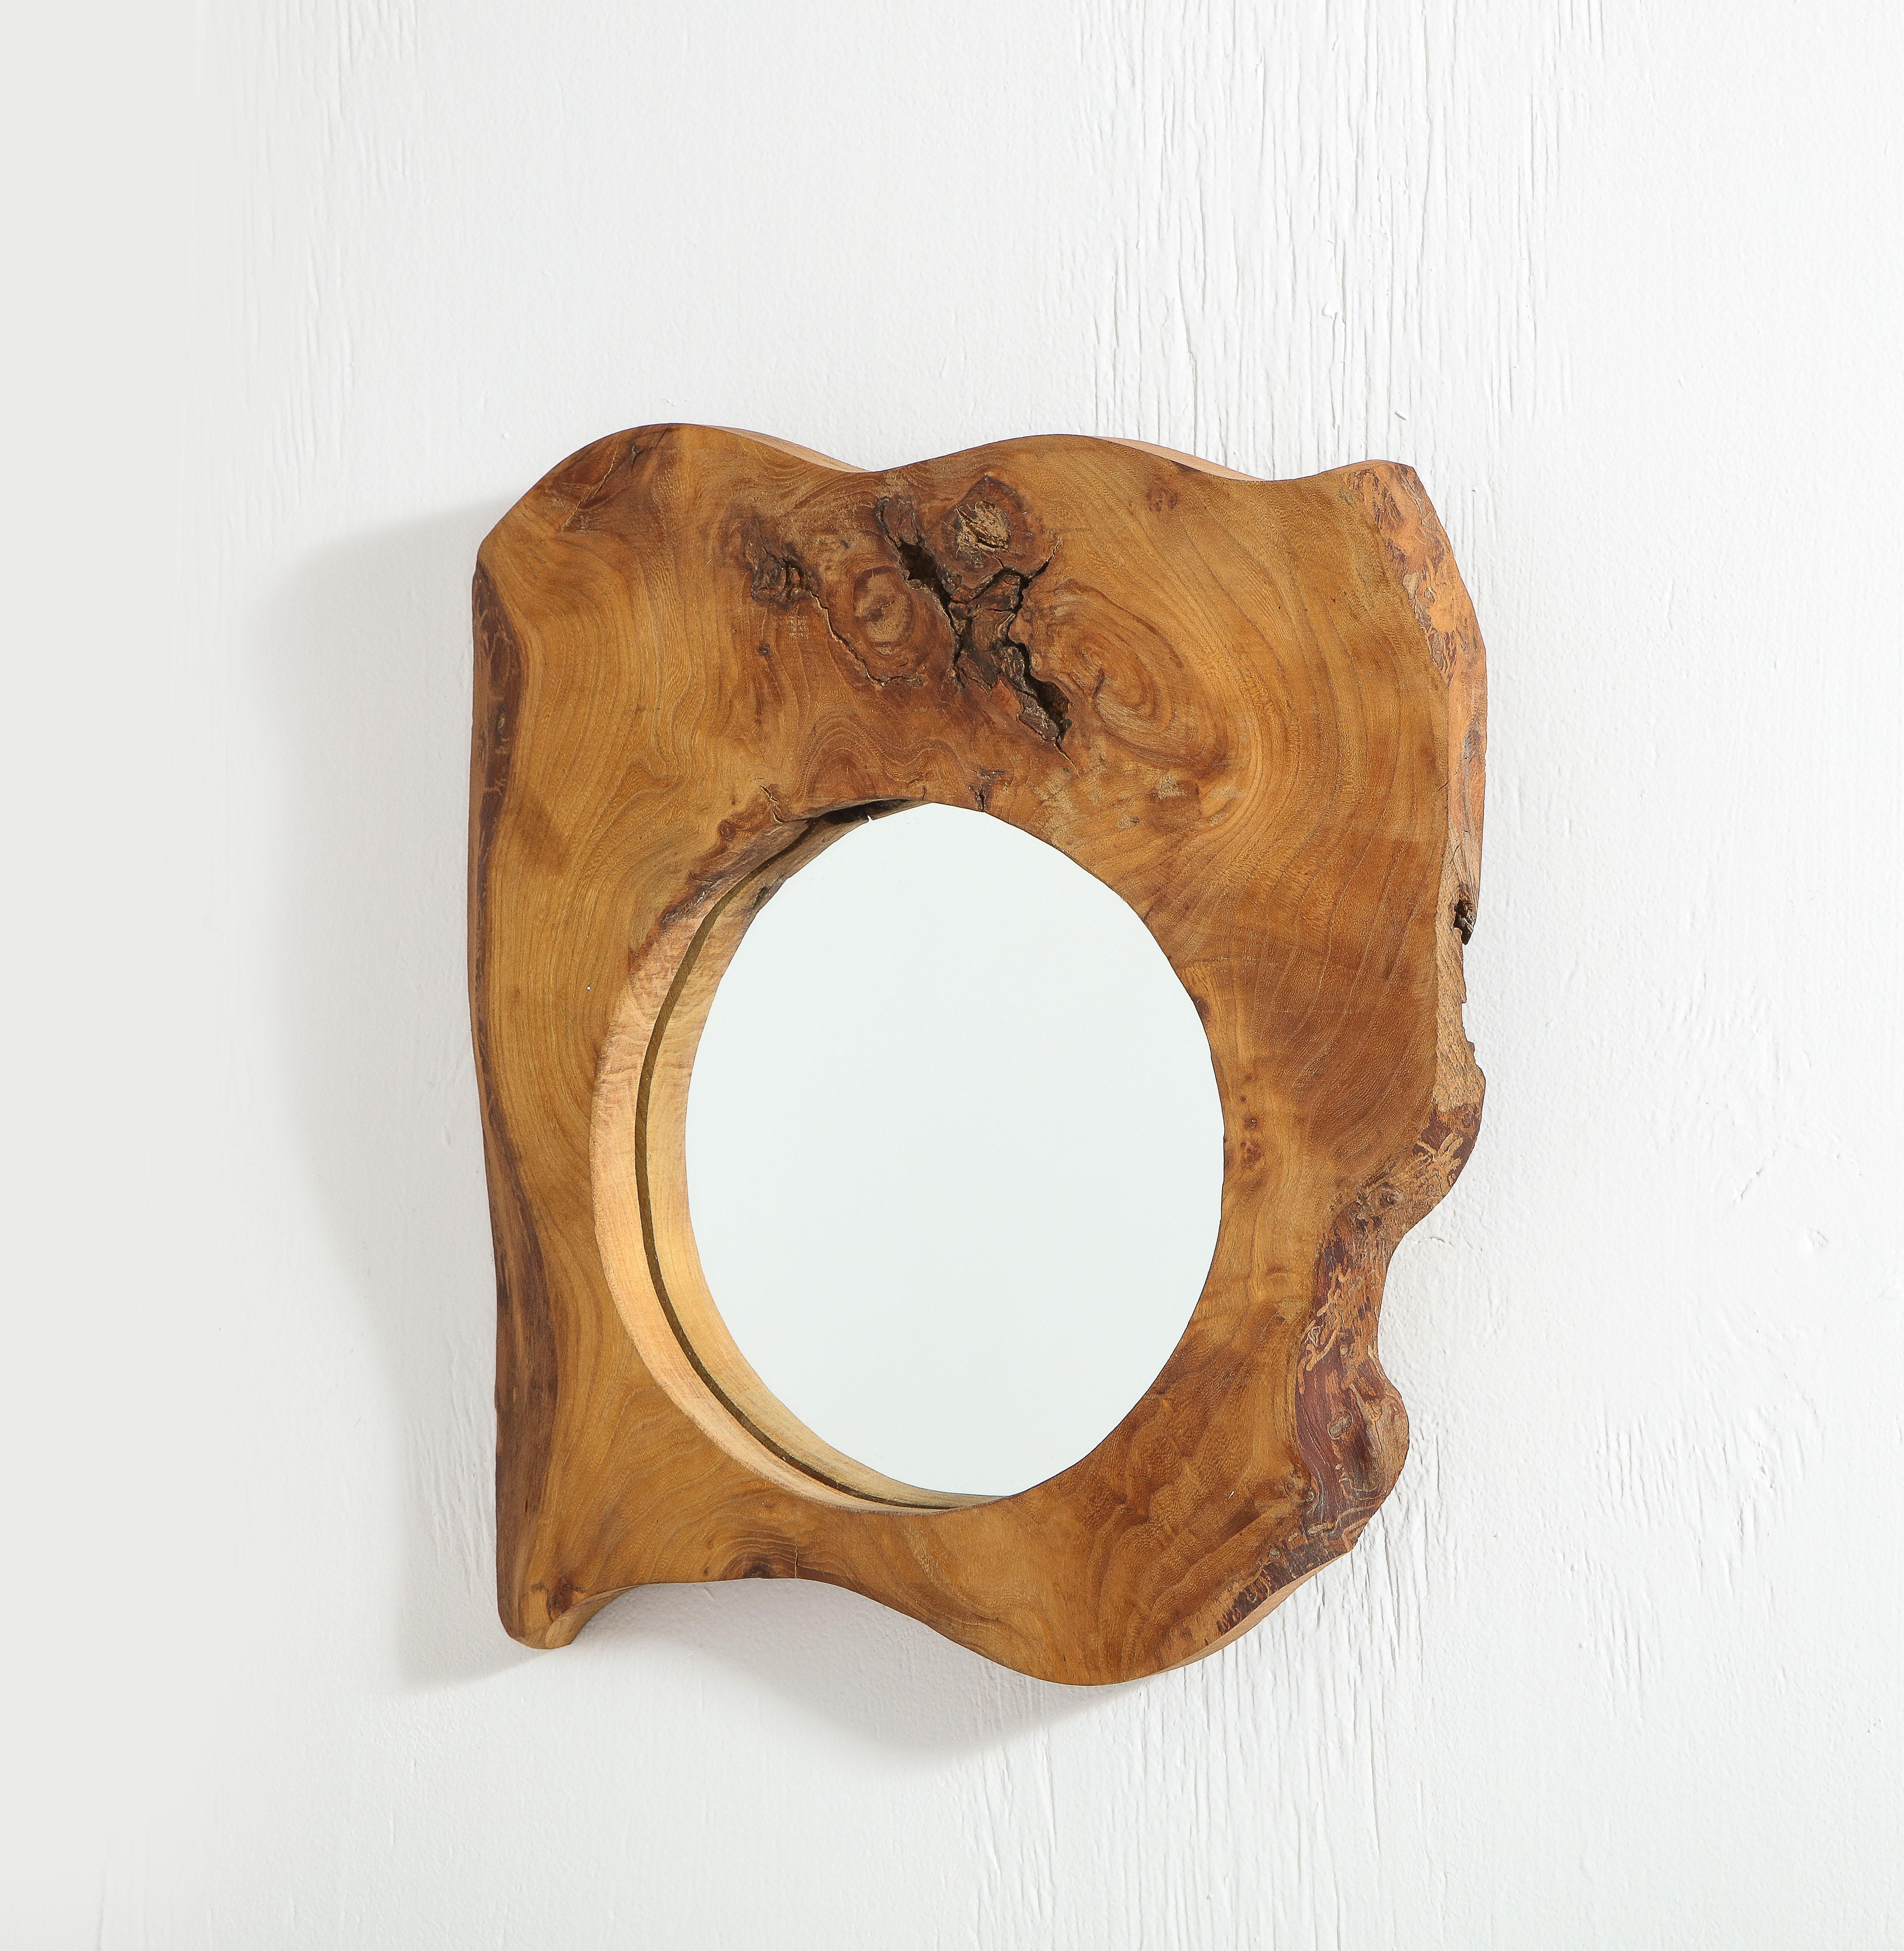 Mirror carved out of solid burl wood.